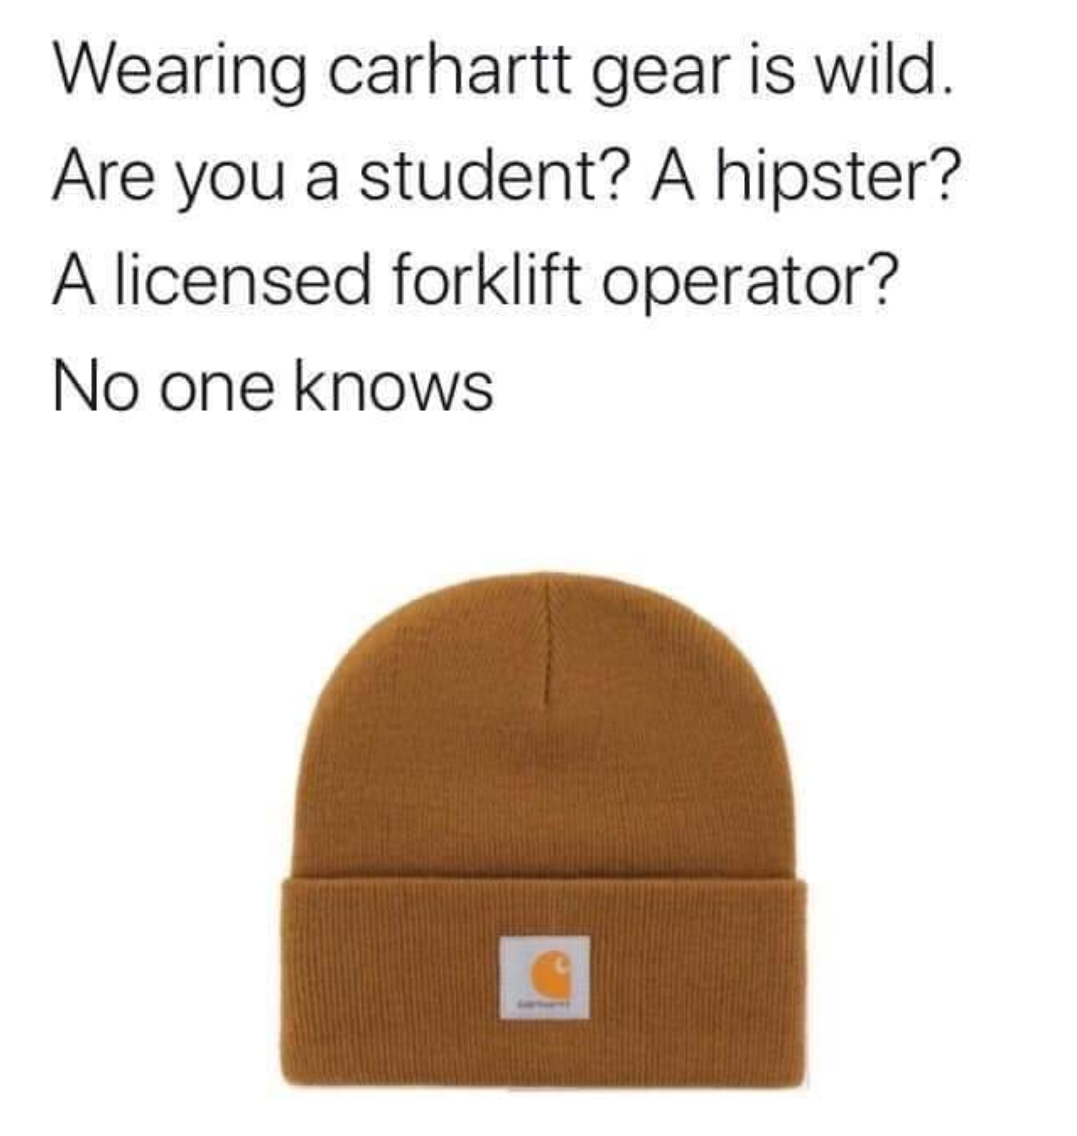 beanie - Wearing carhartt gear is wild. Are you a student? A hipster? A licensed forklift operator? No one knows